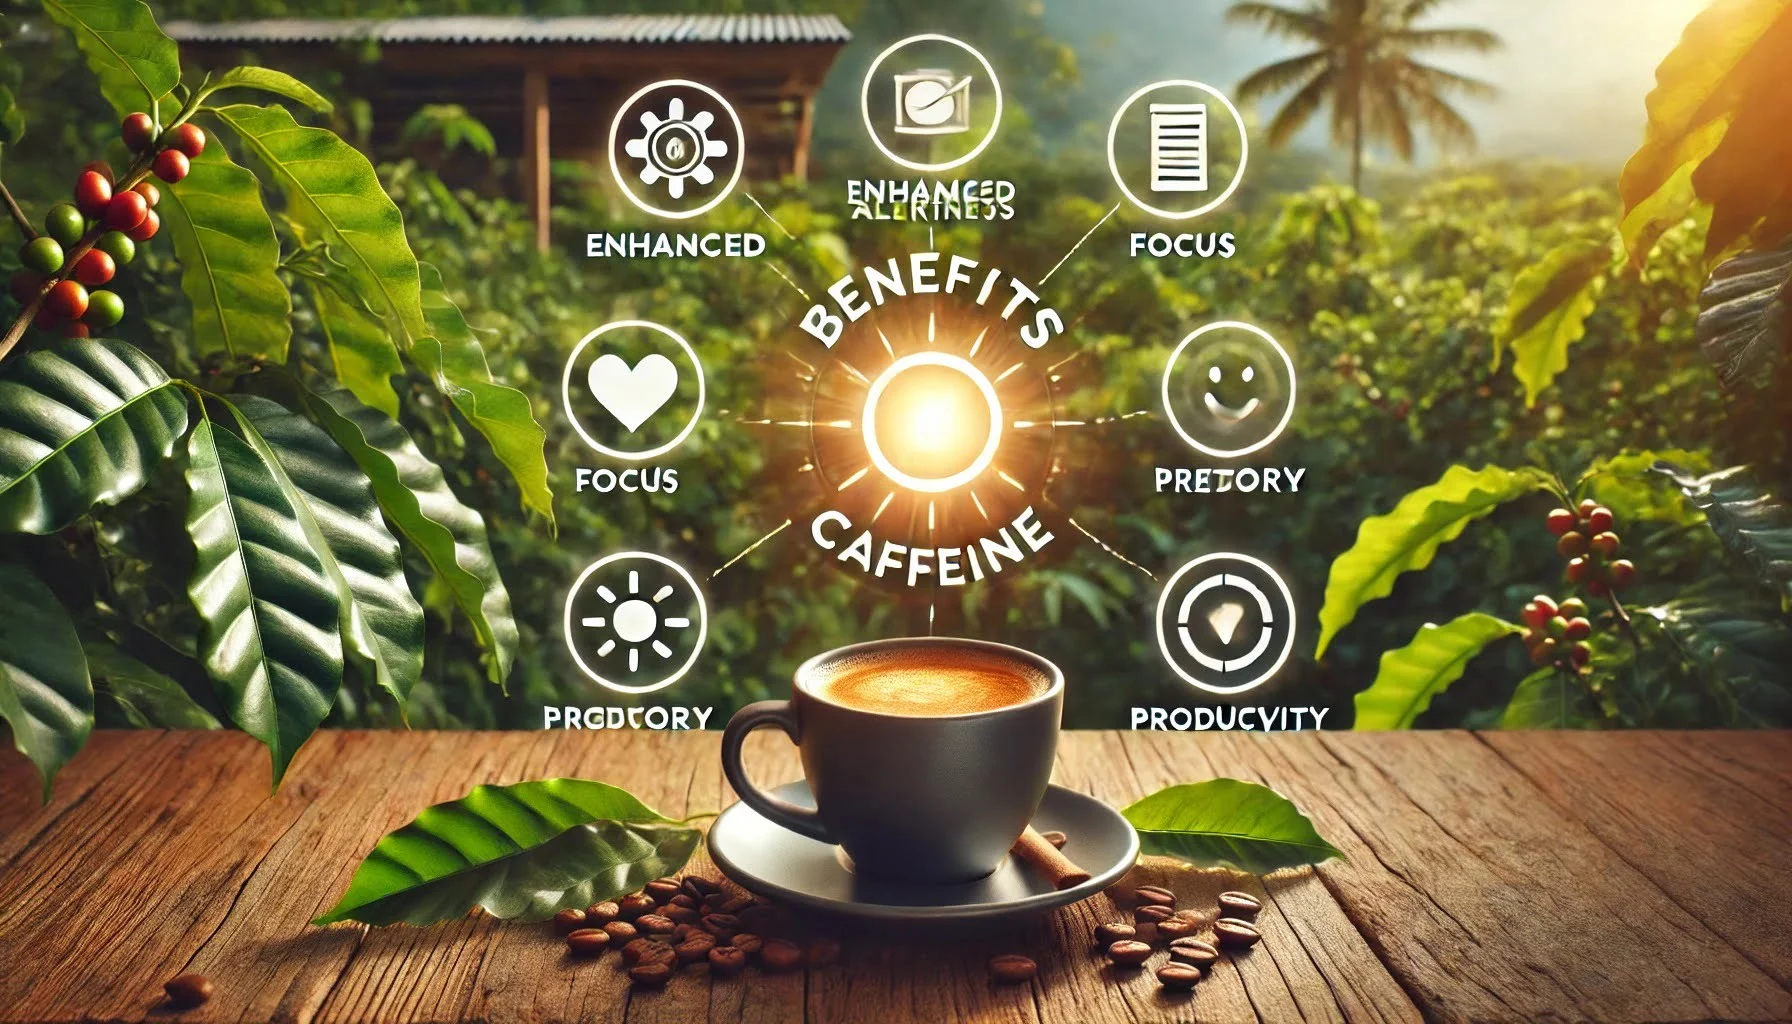 caffeine nootropic effects on alertness, memory, anxiety